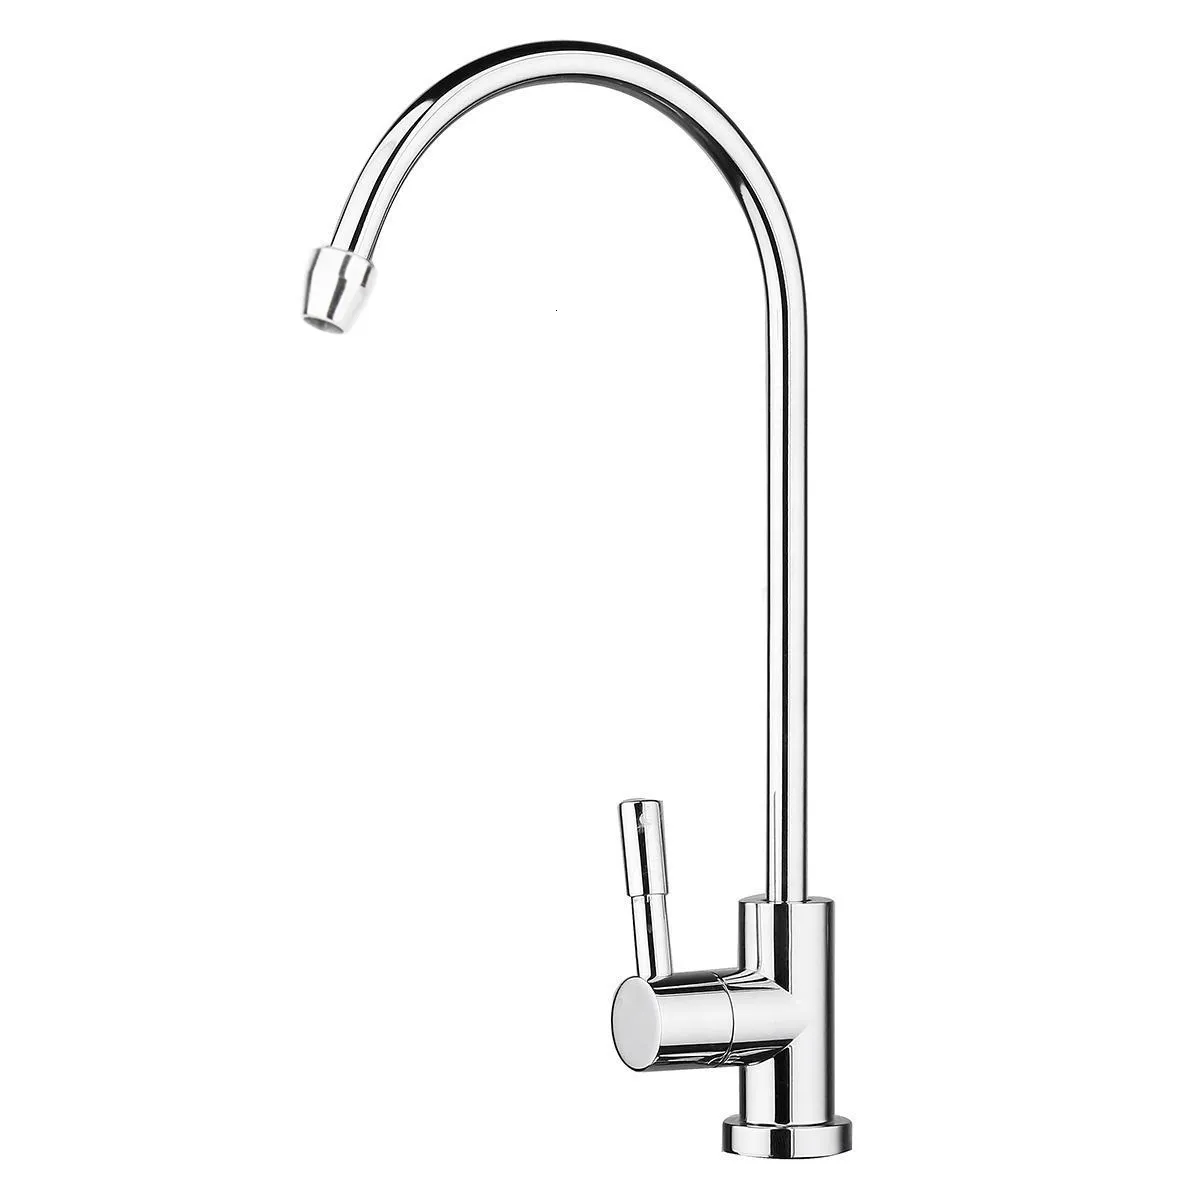 1/4" 304 Stainless Steel Drinking Water Faucet 360 Degree Chrome Osmosis Drinking RO Water Filter Faucet Finish Reverse Sink